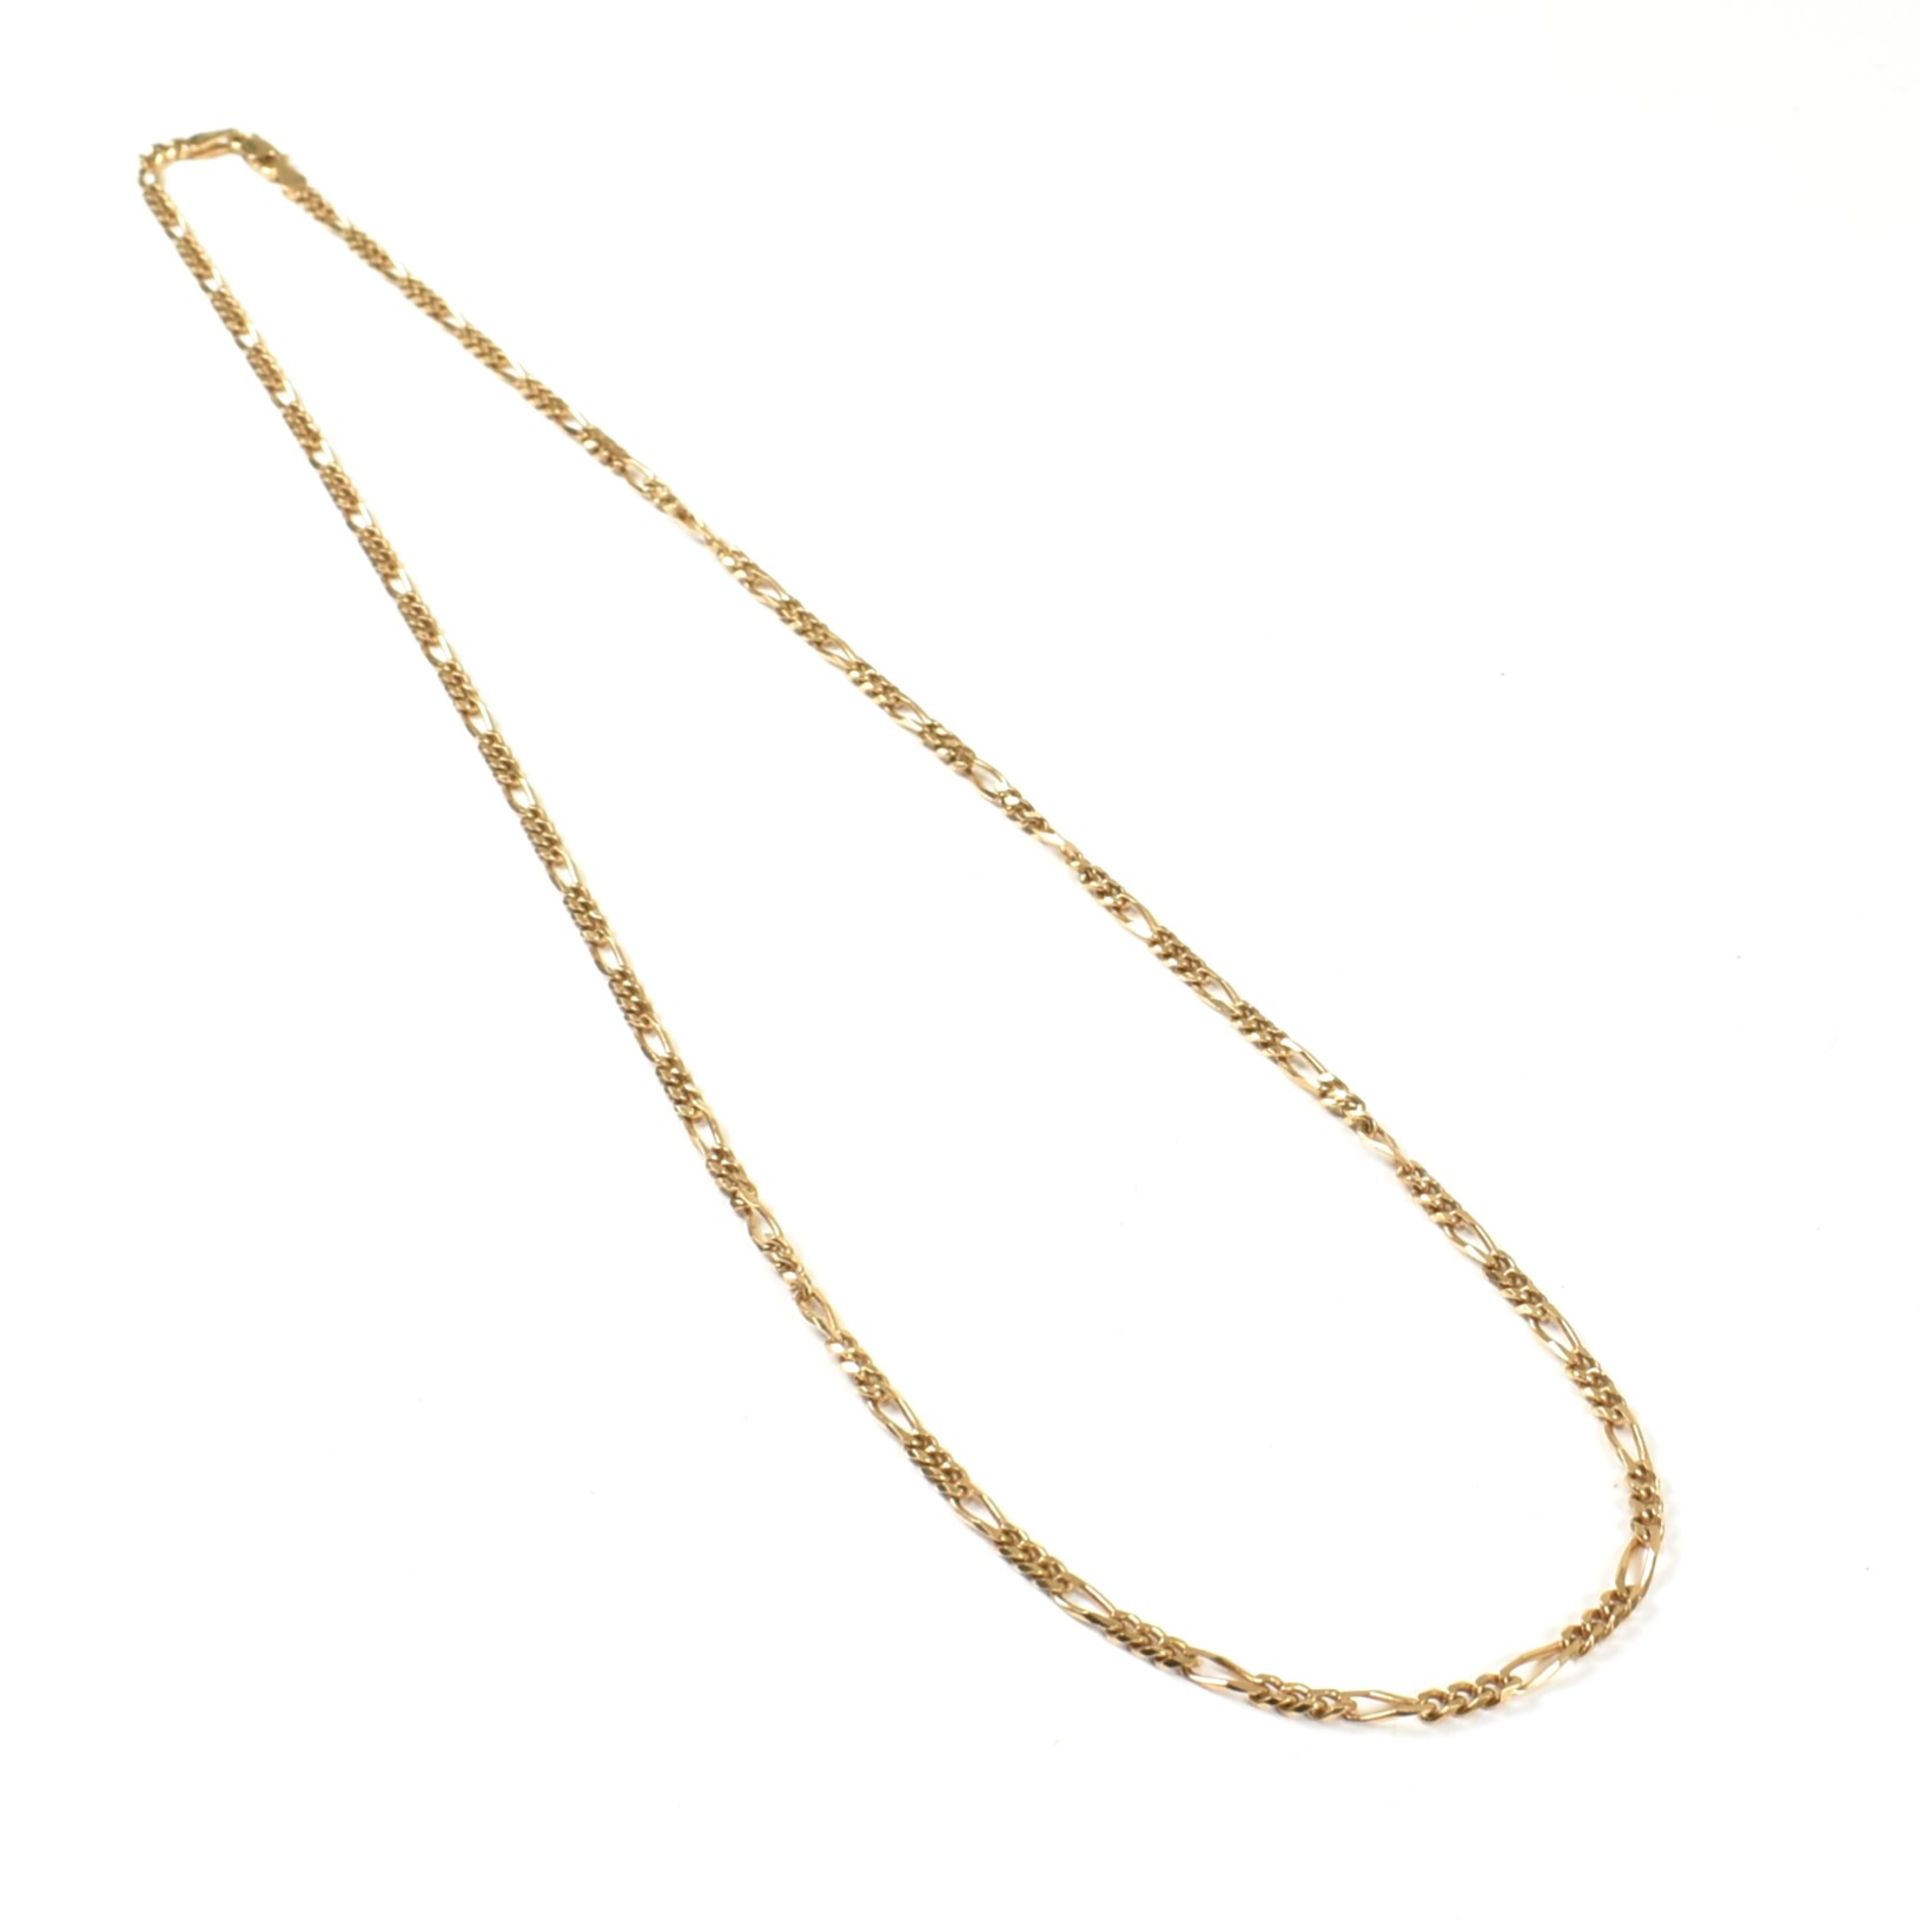 9CT GOLD FIGARO CHAIN LINK NECKLACE - Image 2 of 6